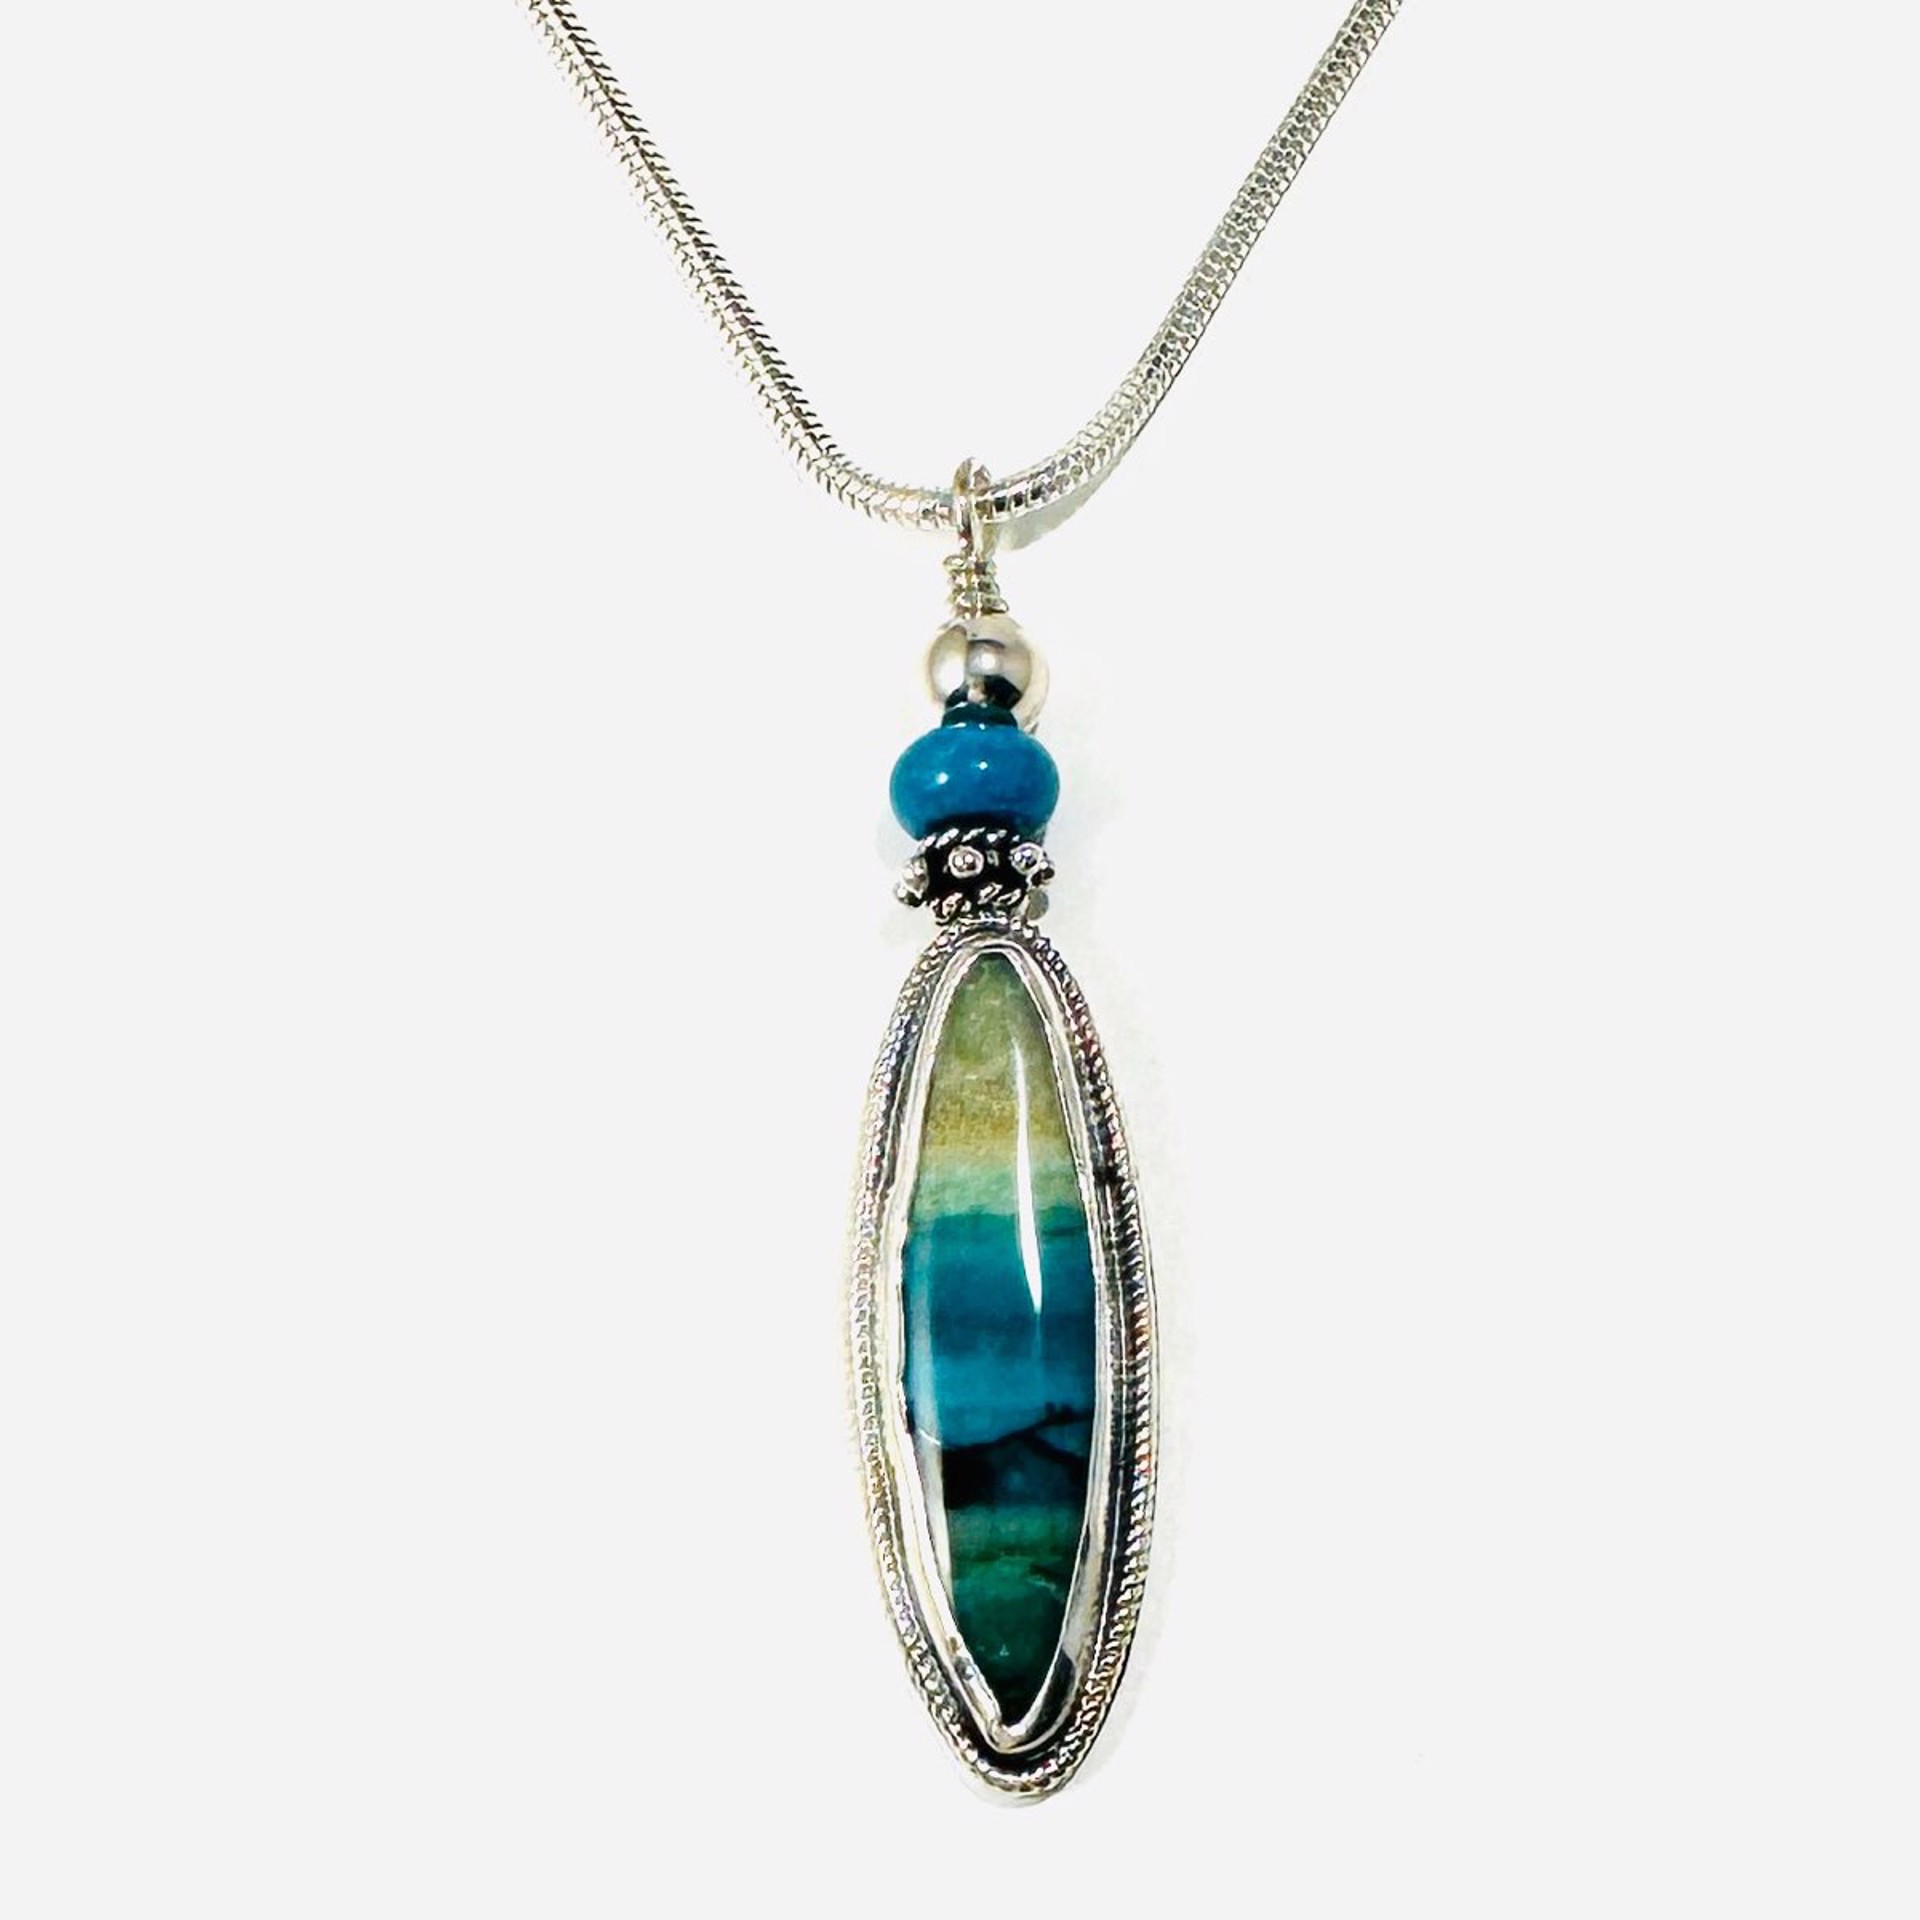 Opalized Petrified Wood Pendant, Turquoise Bead on 18"snake chain AB23-116 by Anne Bivens